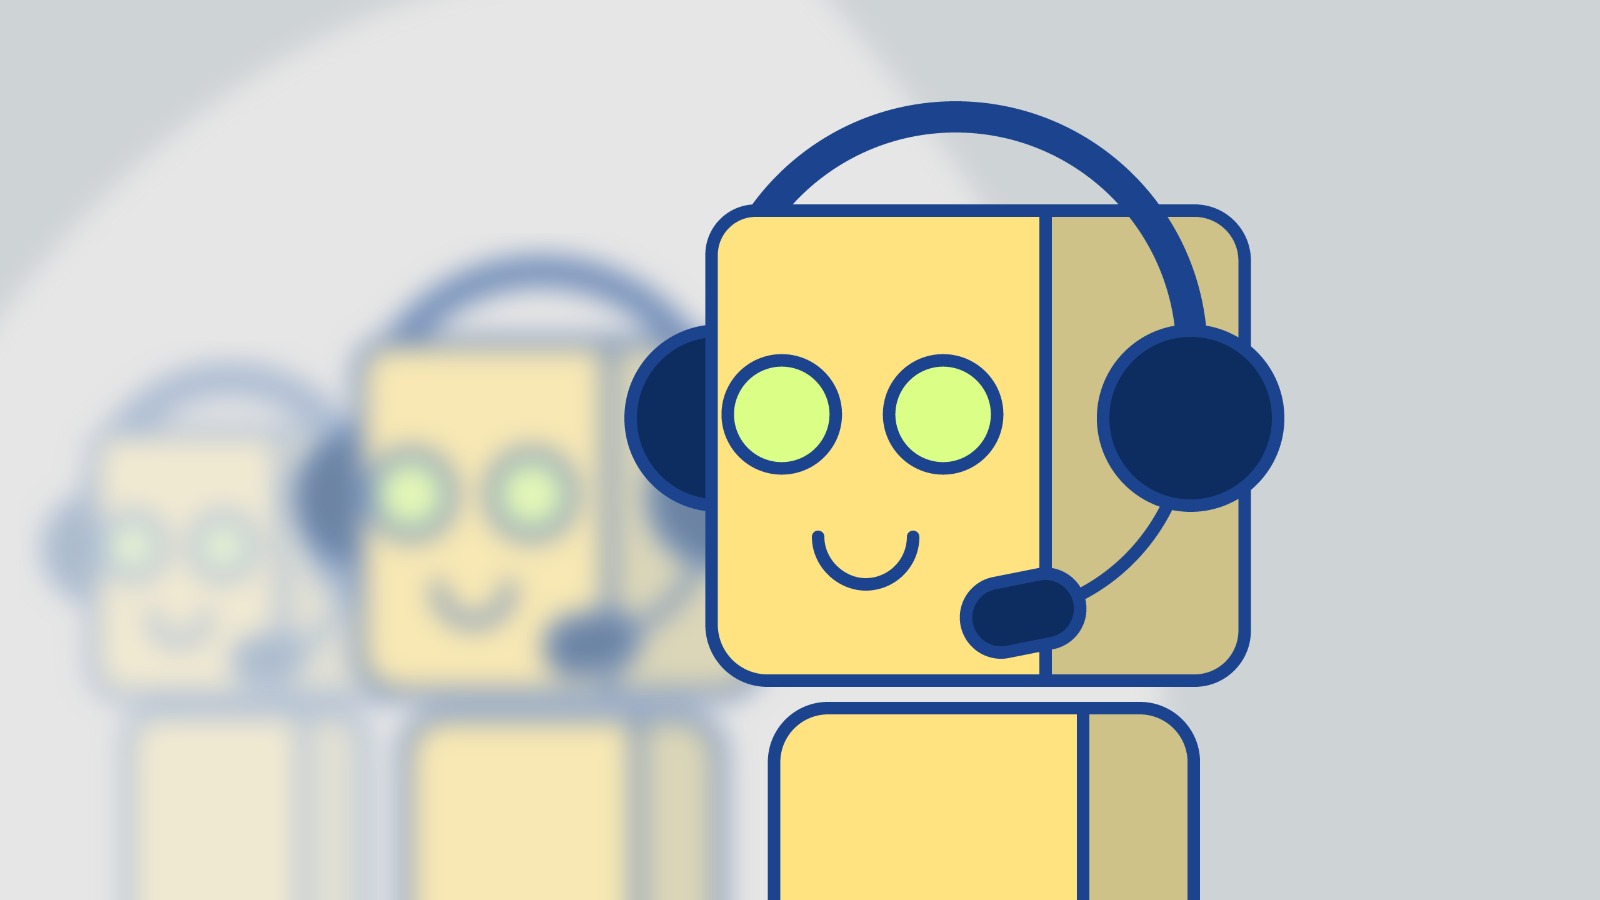 Animated image showing a robot insinuating IT Help Desk